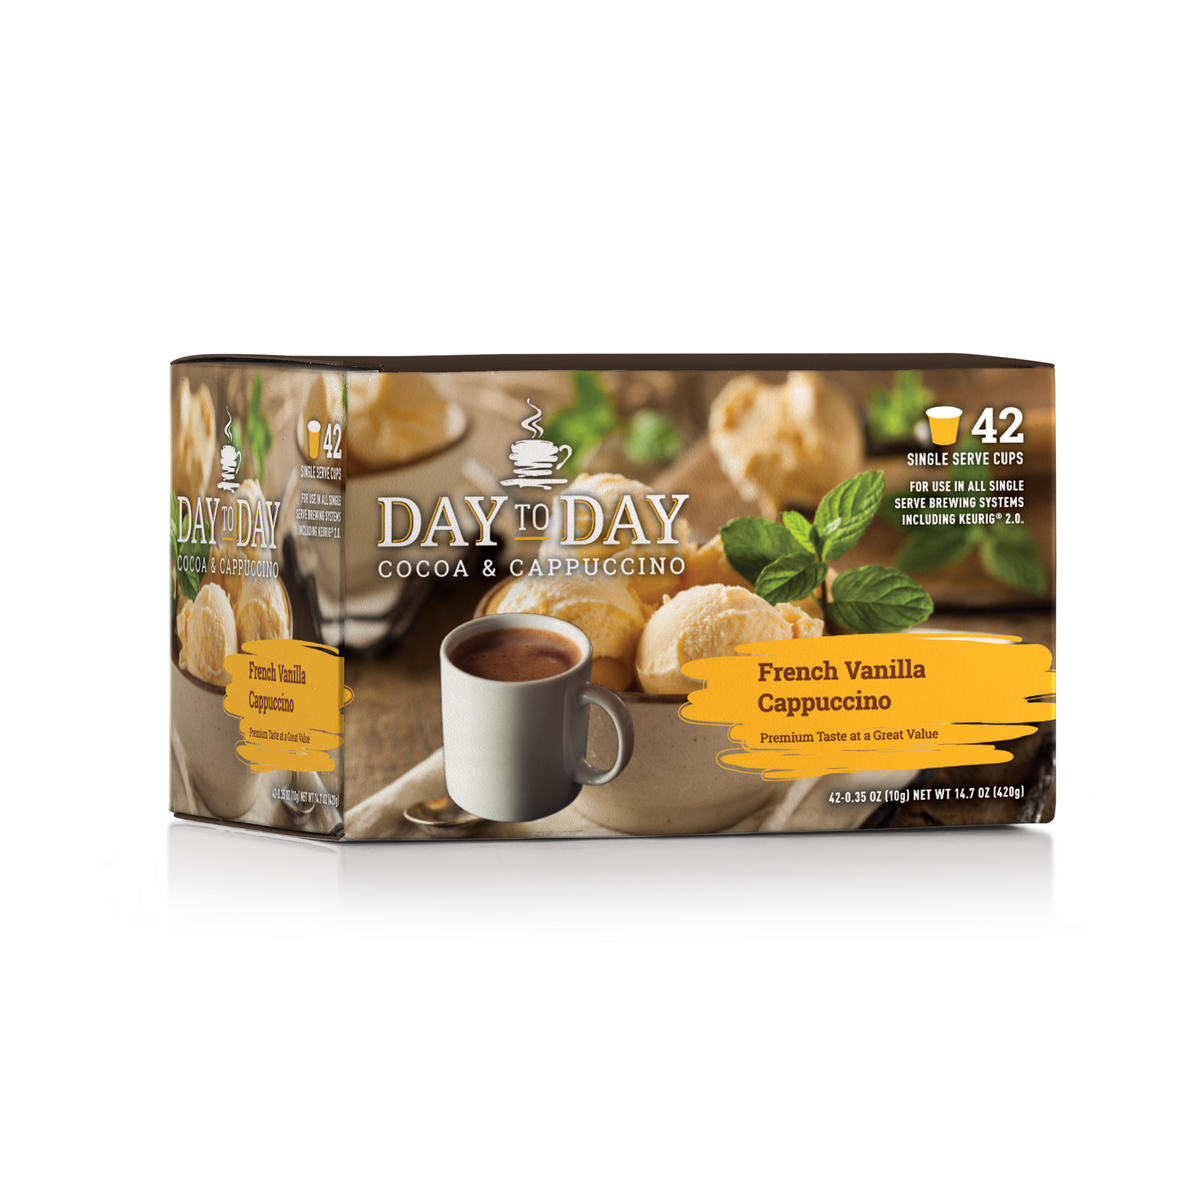 Day to day coffee 42 count french vanilla capuccino coffee menium roast coffee pods for single serve coffee brewer 